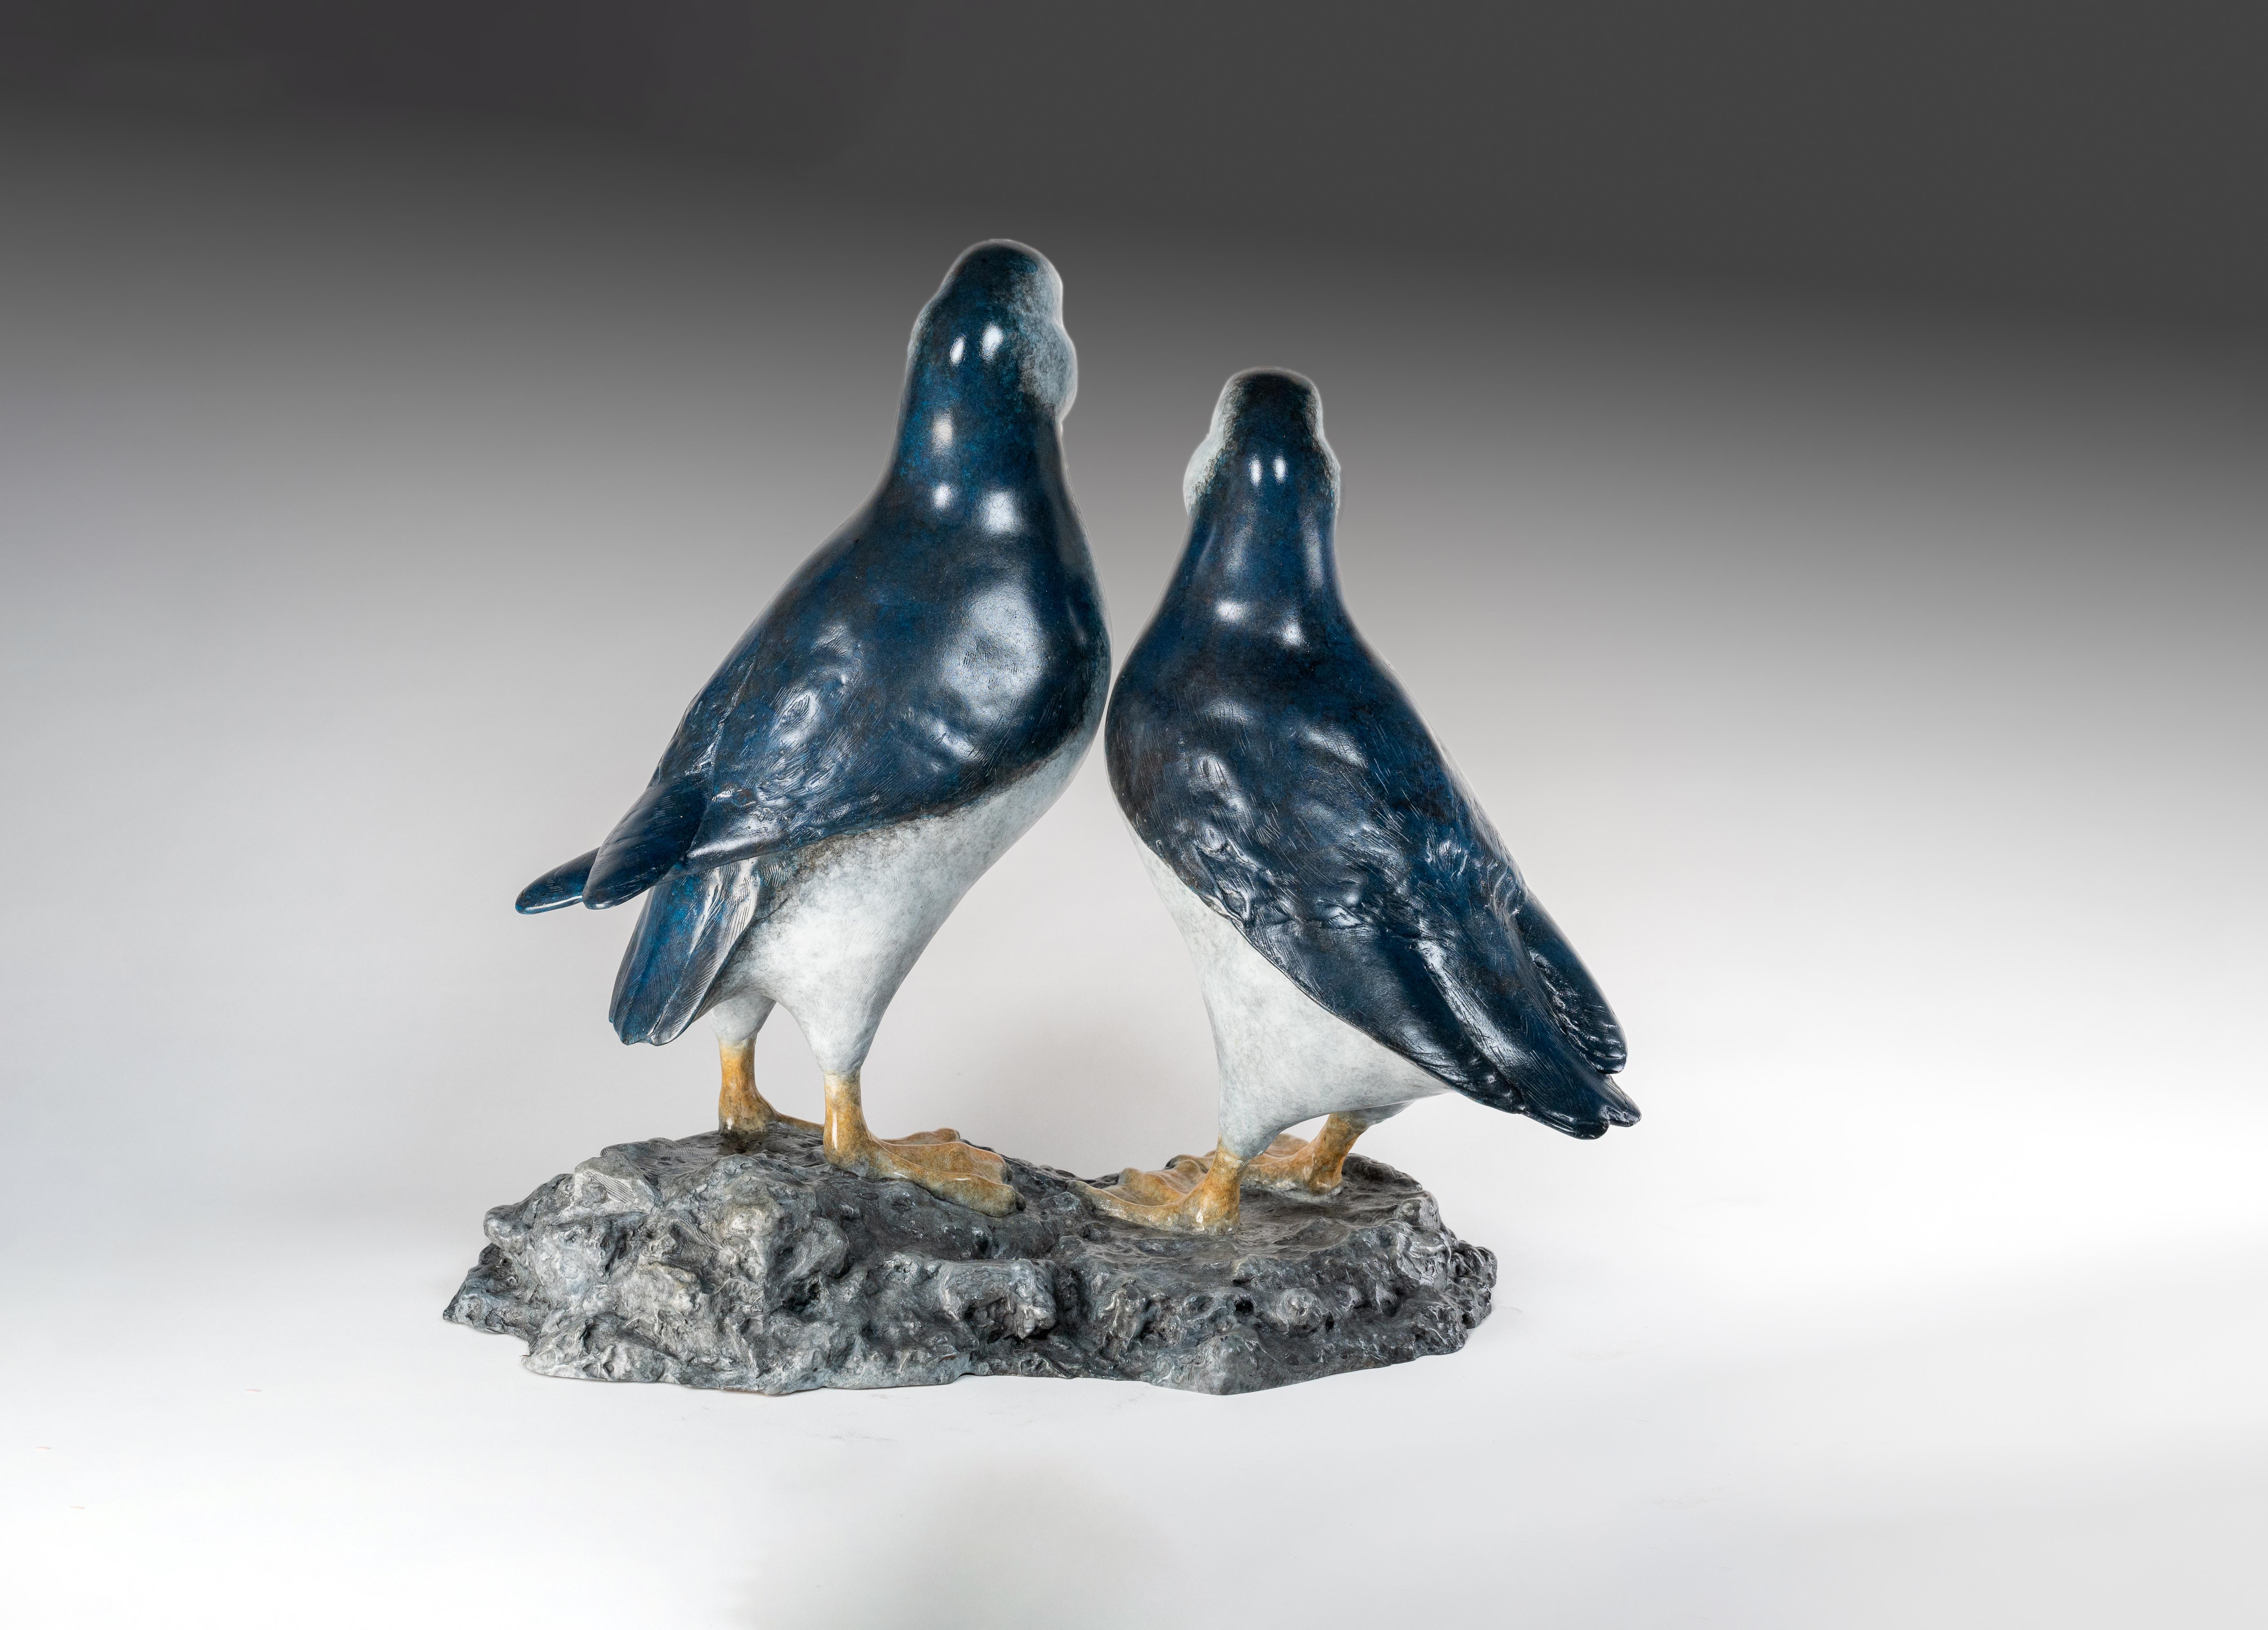 'Best Friends' by Tobias Martin is a Solid Bronze Animal Sculpture of a pair of puffins on rocks, amaxing blue patina with white and orange bill. 

Tobias Martin was born in 1972 in Wiltshire, 12 miles from Stonehenge. Influenced by his idyllic